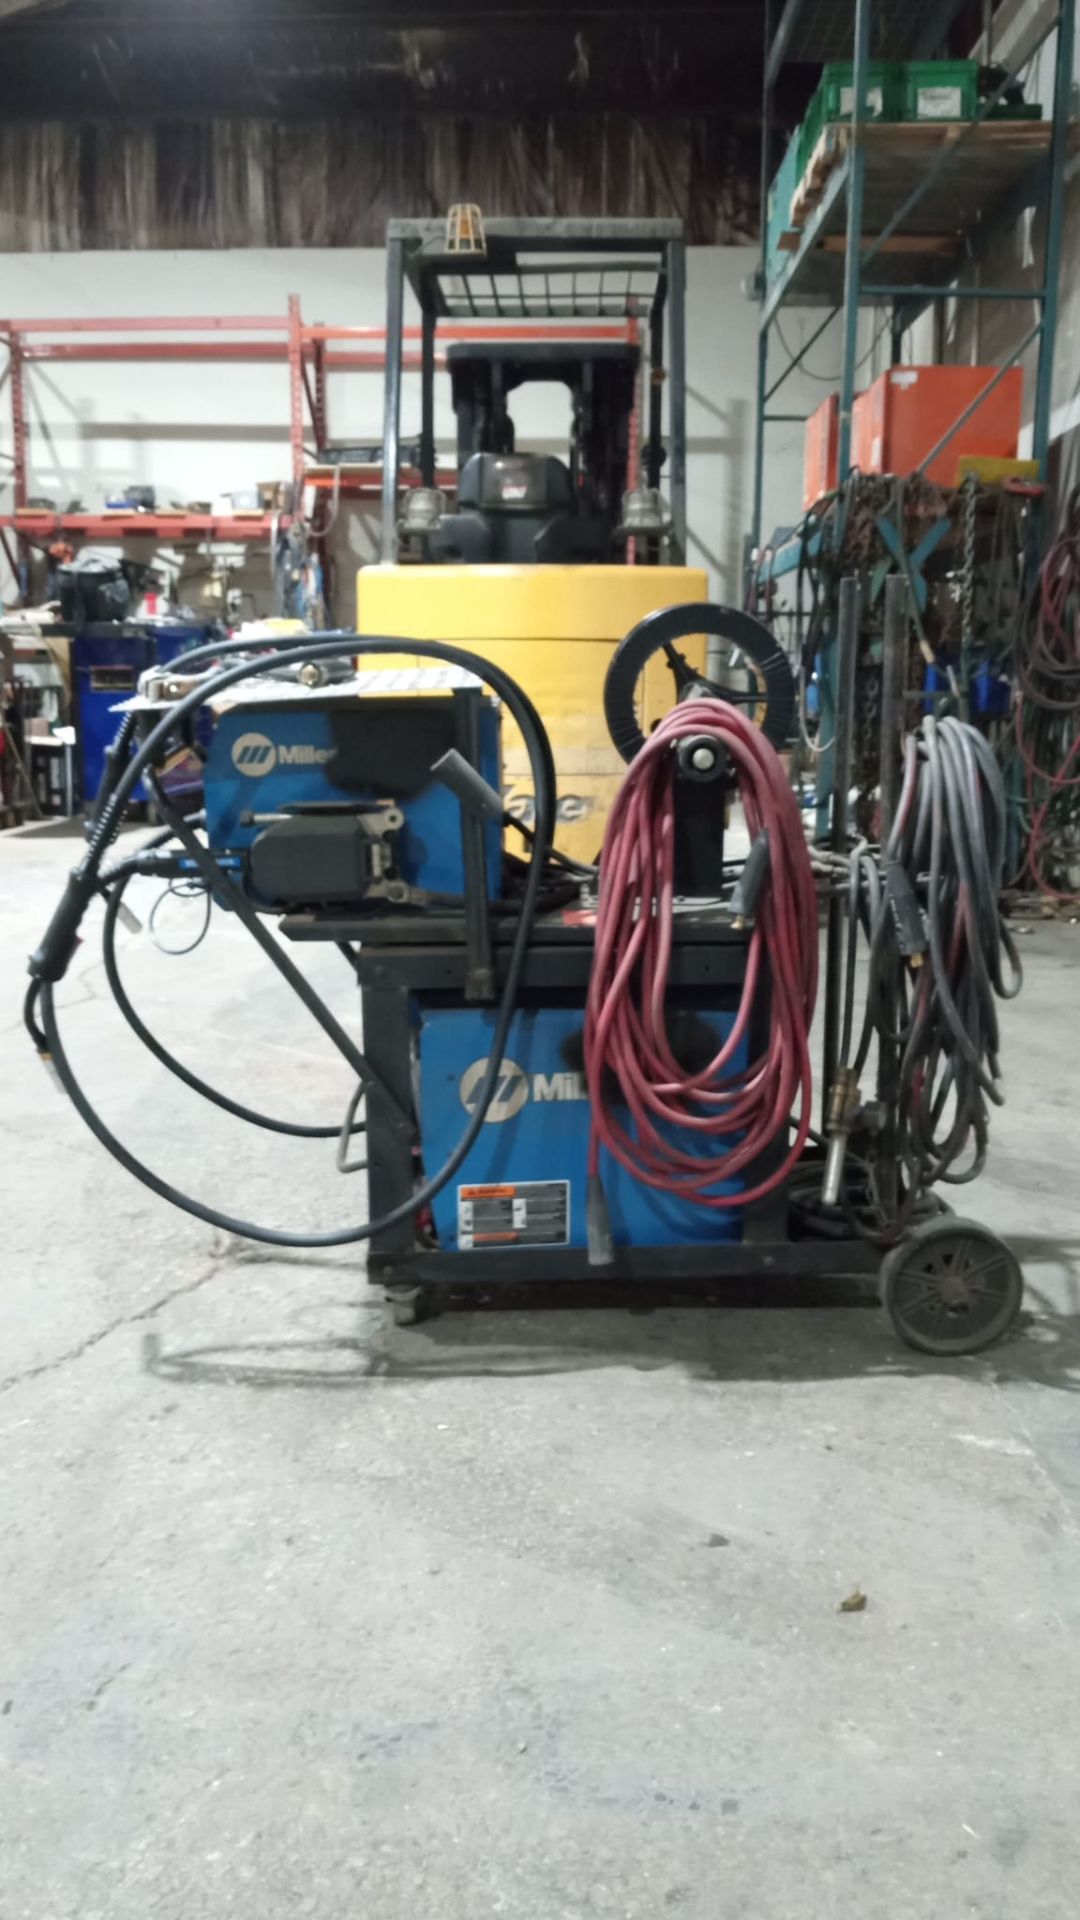 Miller XMT 304 CC/CV DC Inverter Multi Process Welder with DUAL 4-Wheel 60 Serial Feeder with mig - Image 4 of 6